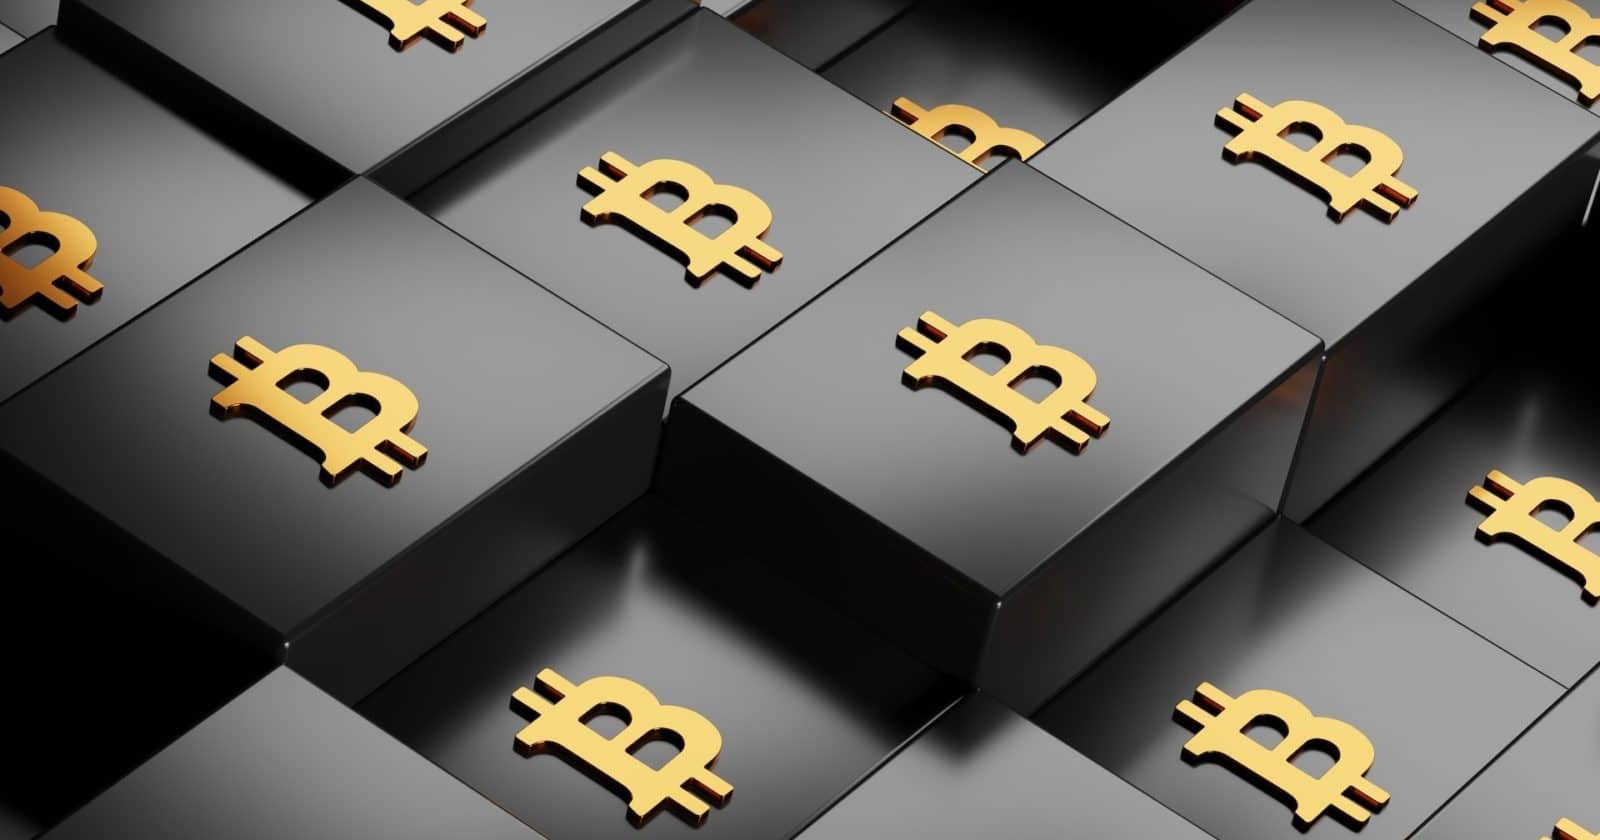 Ordinals Flood Bitcoin Network With Over 154k Inscriptions